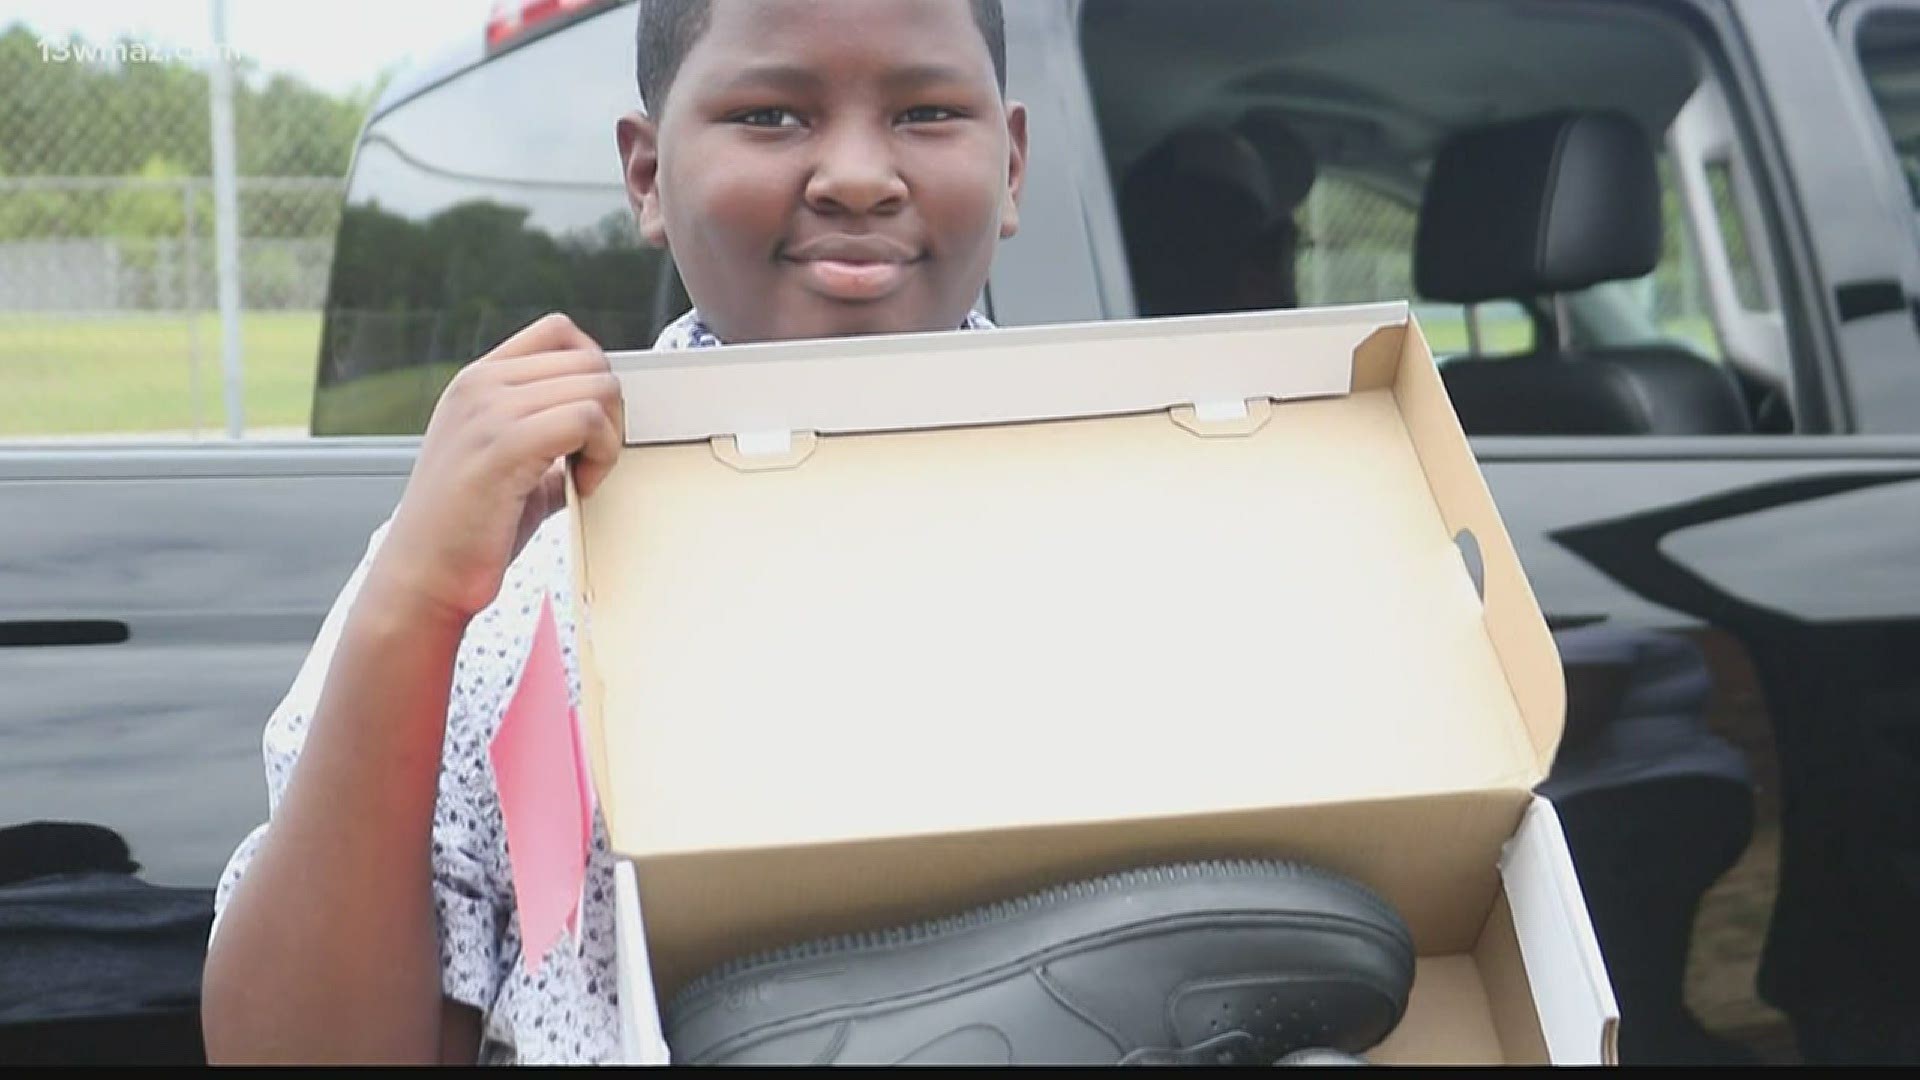 Harvest Builders Worship Center partnered with Fresh Sneaker Boutique to give students free sneakers